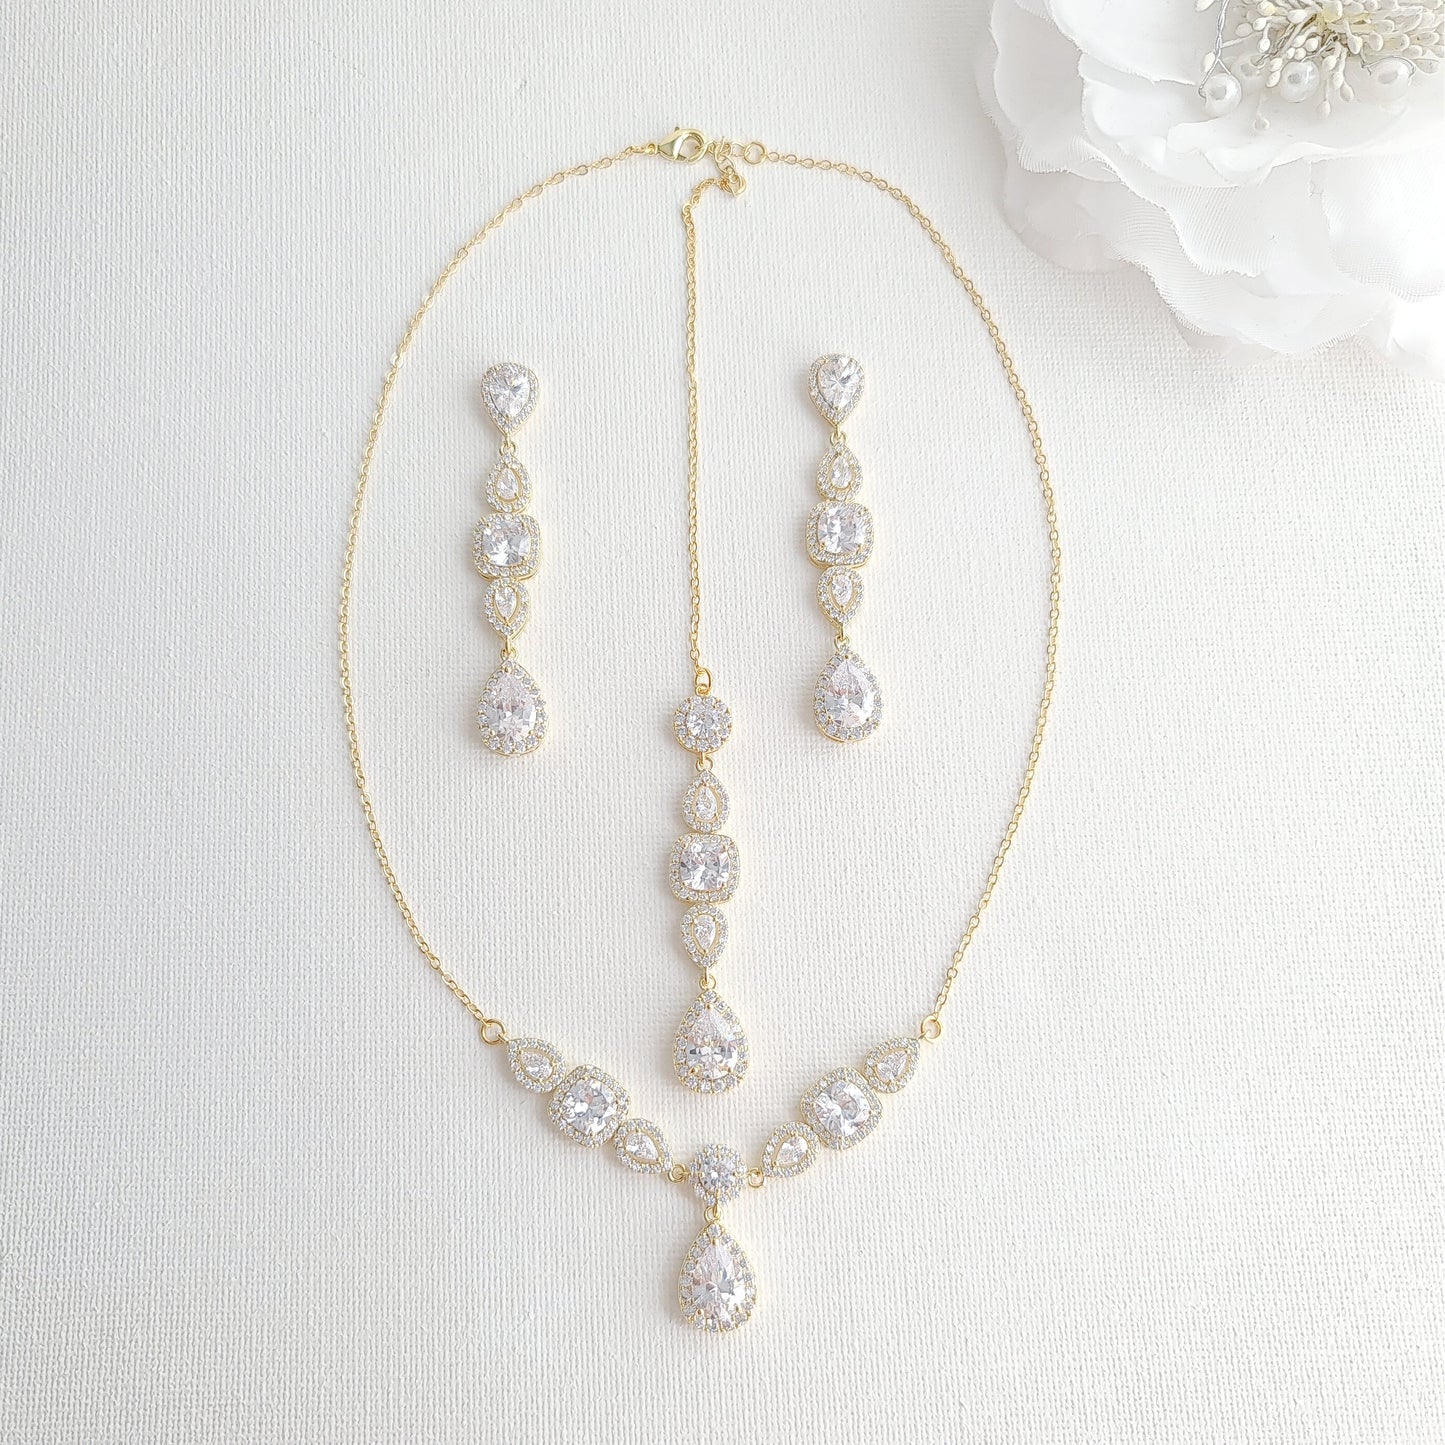 3 Piece Gold Jewellery Set For Brides-Gianna